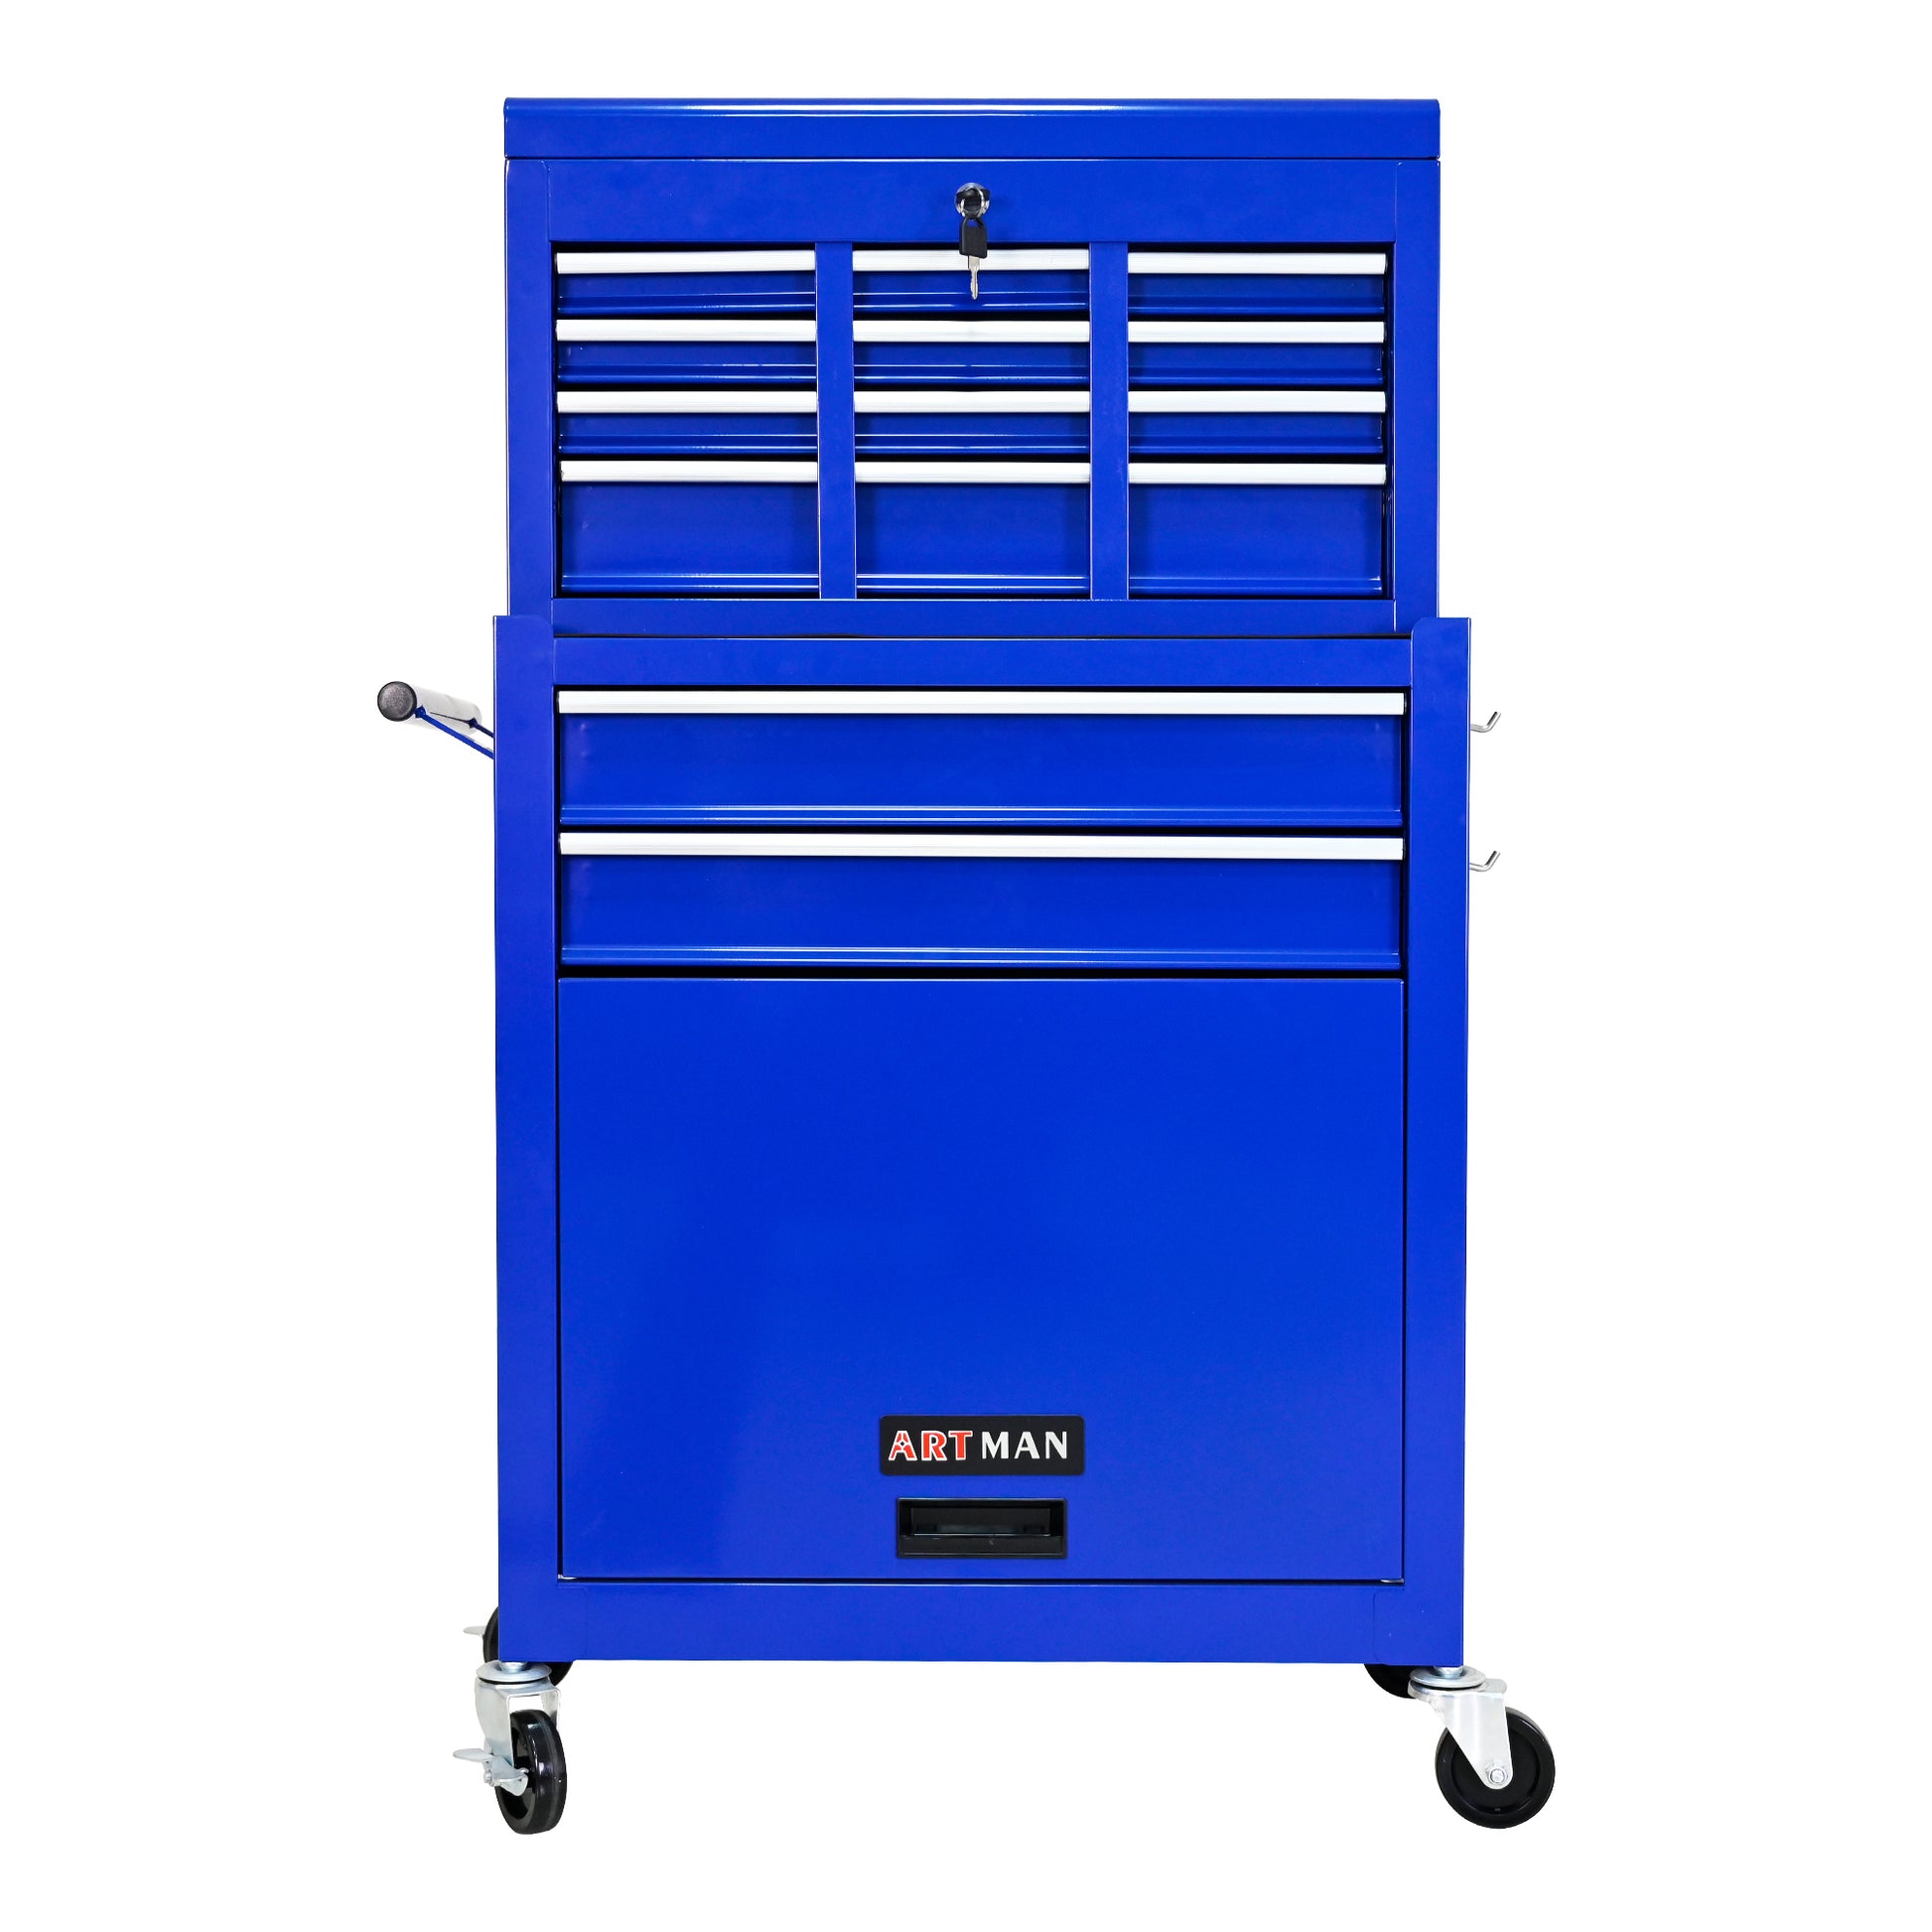 High Capacity Rolling Tool Chest with Wheels and navy blue-steel